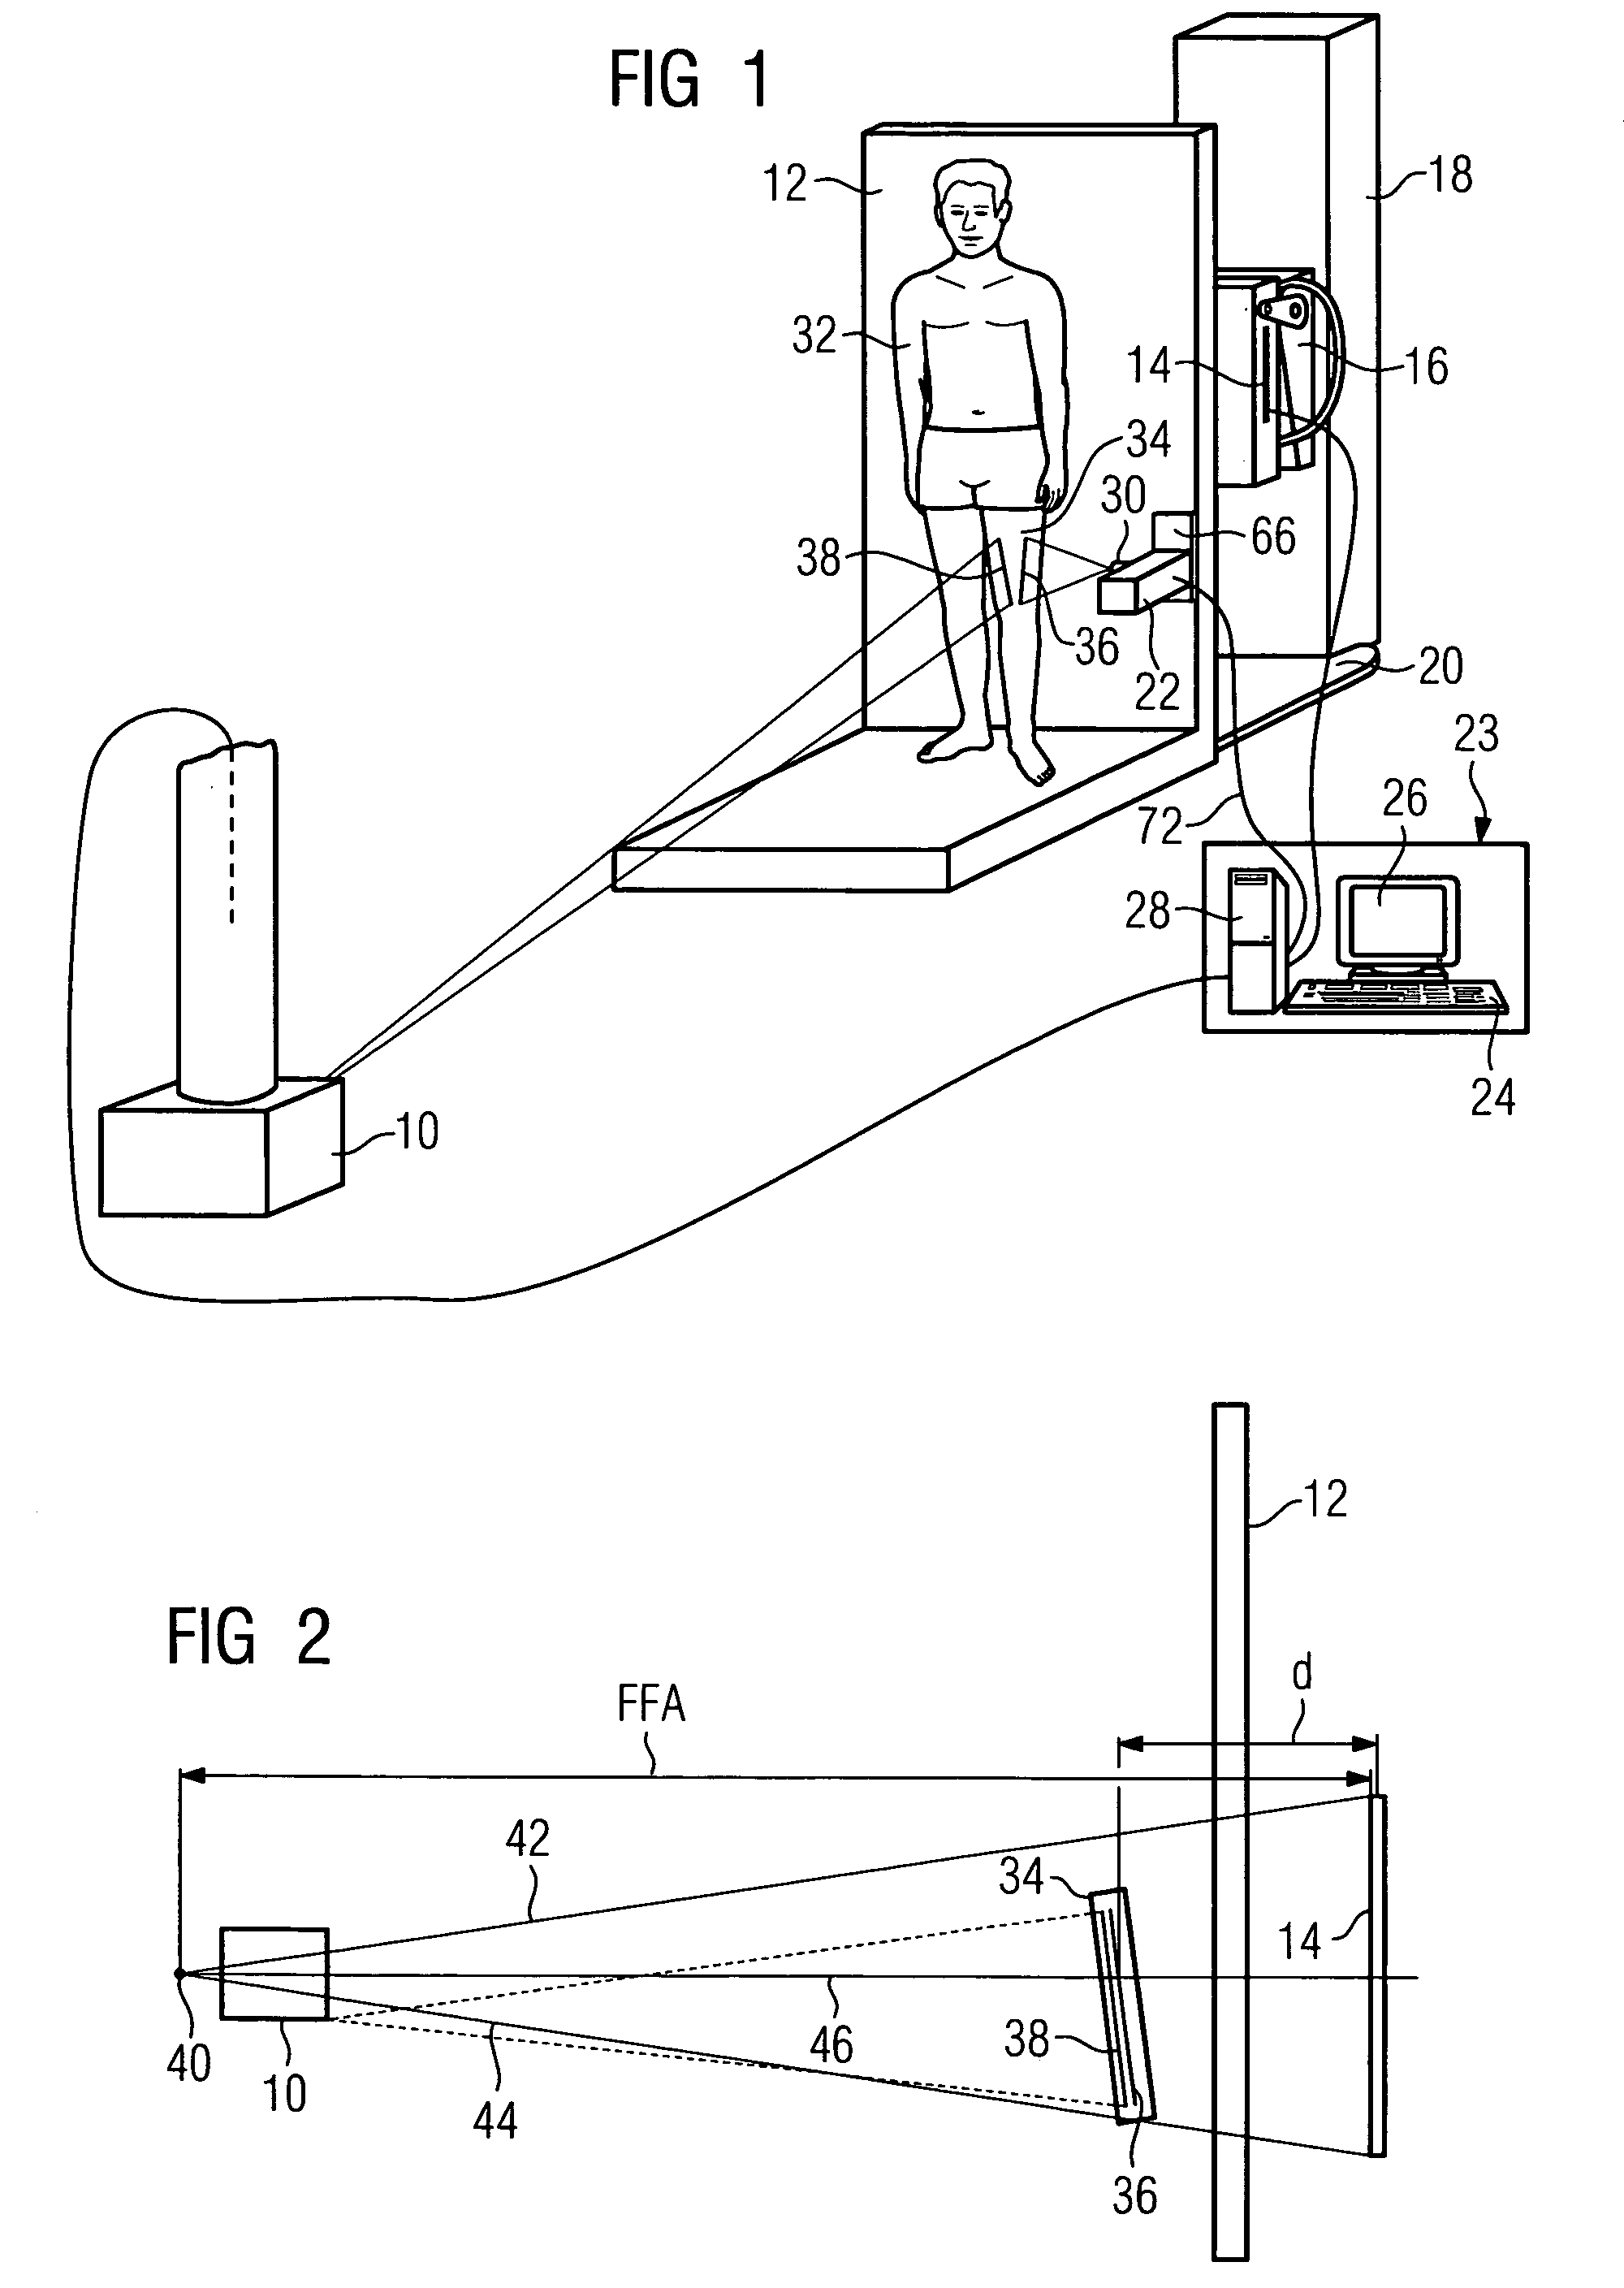 Method for generating an X-ray image of an extremity of a patient with a scale of length